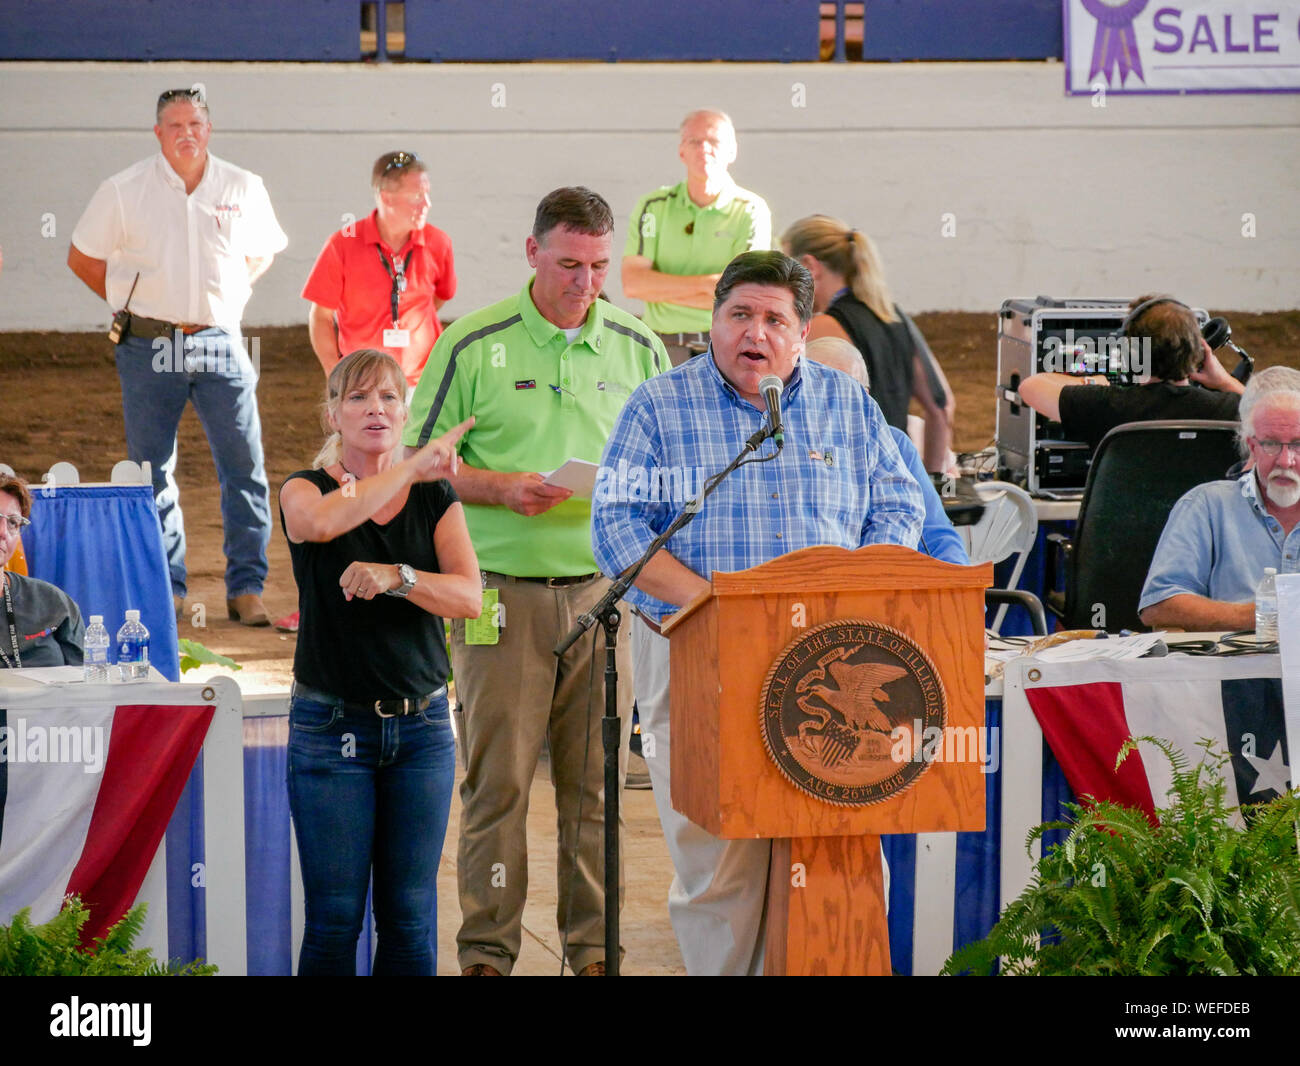 Springfield, Illinois, USA. 13th August 2019. Governor JB Pritzker speaking at the 2019 Illinois State Fair Governor's Sale of Champions. Department of Agriculture Director John Sullivan in green shirt. Stock Photo